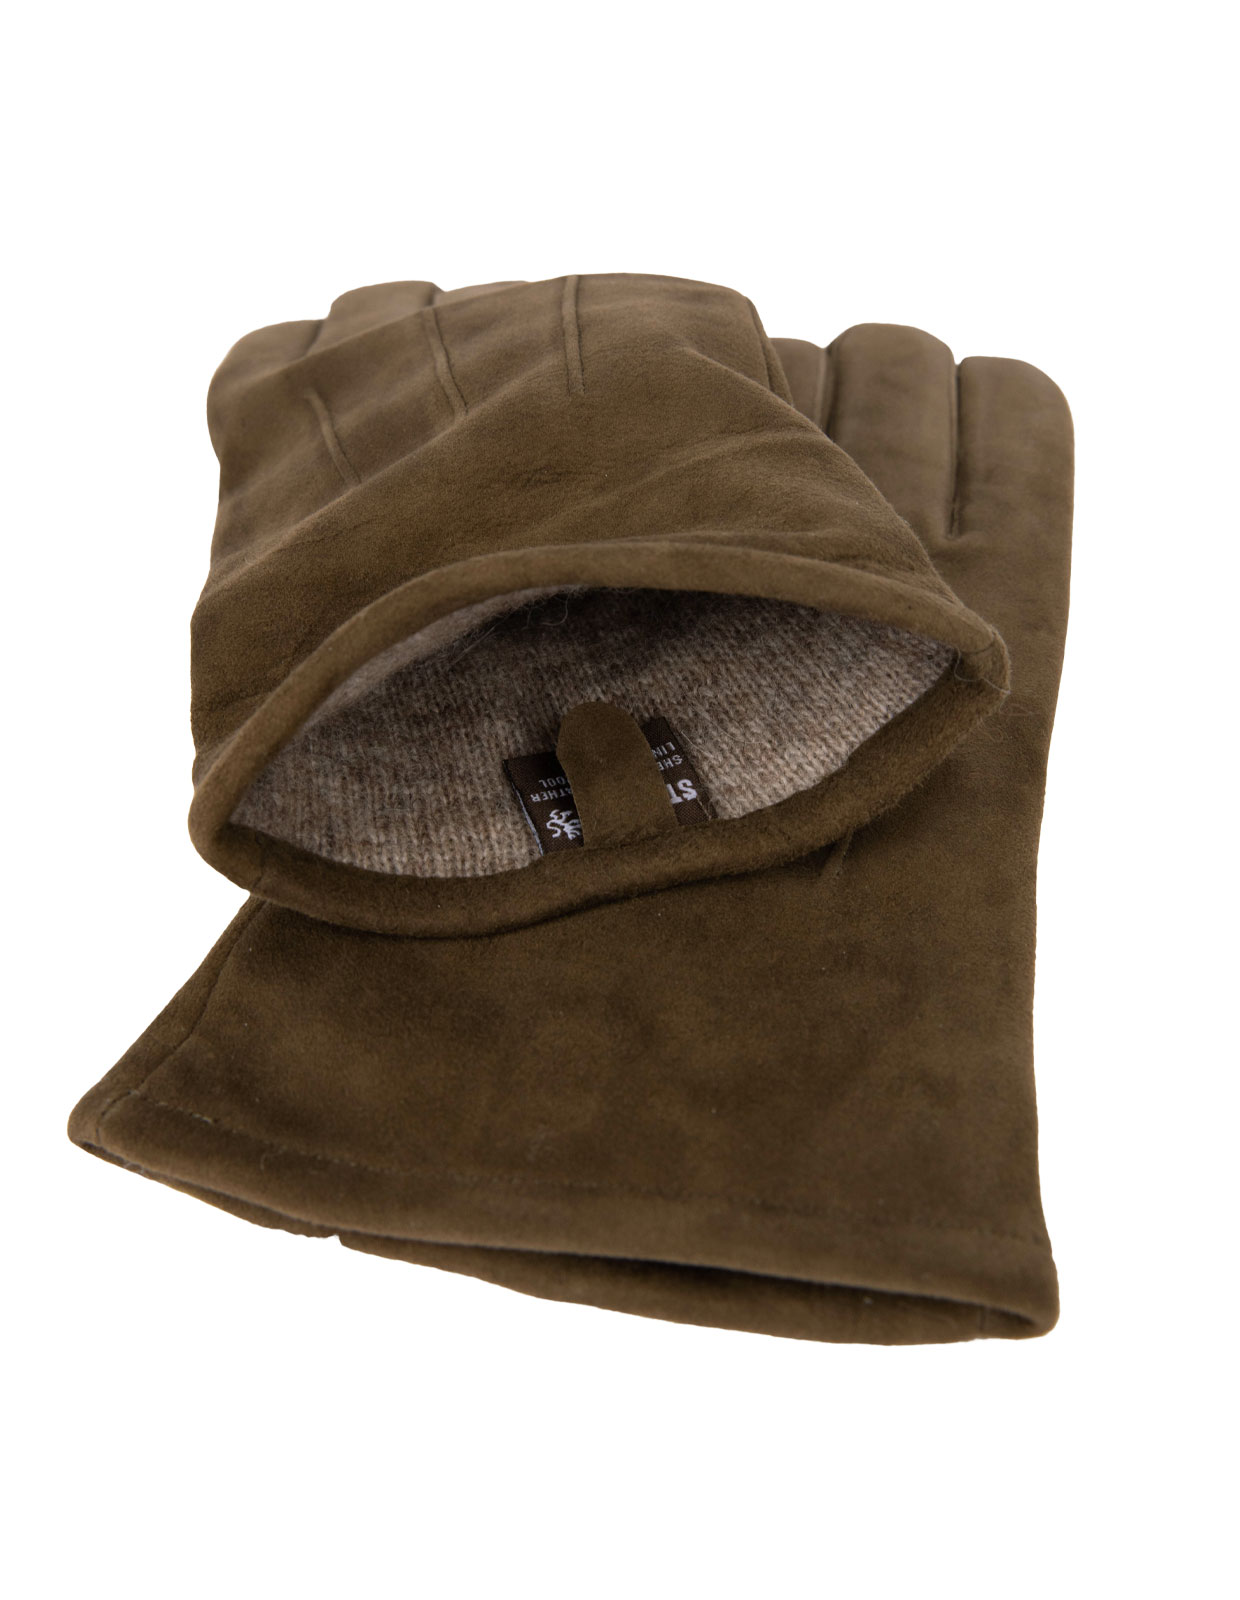 Classic Suede Gloves Olive Green Stl 8.5